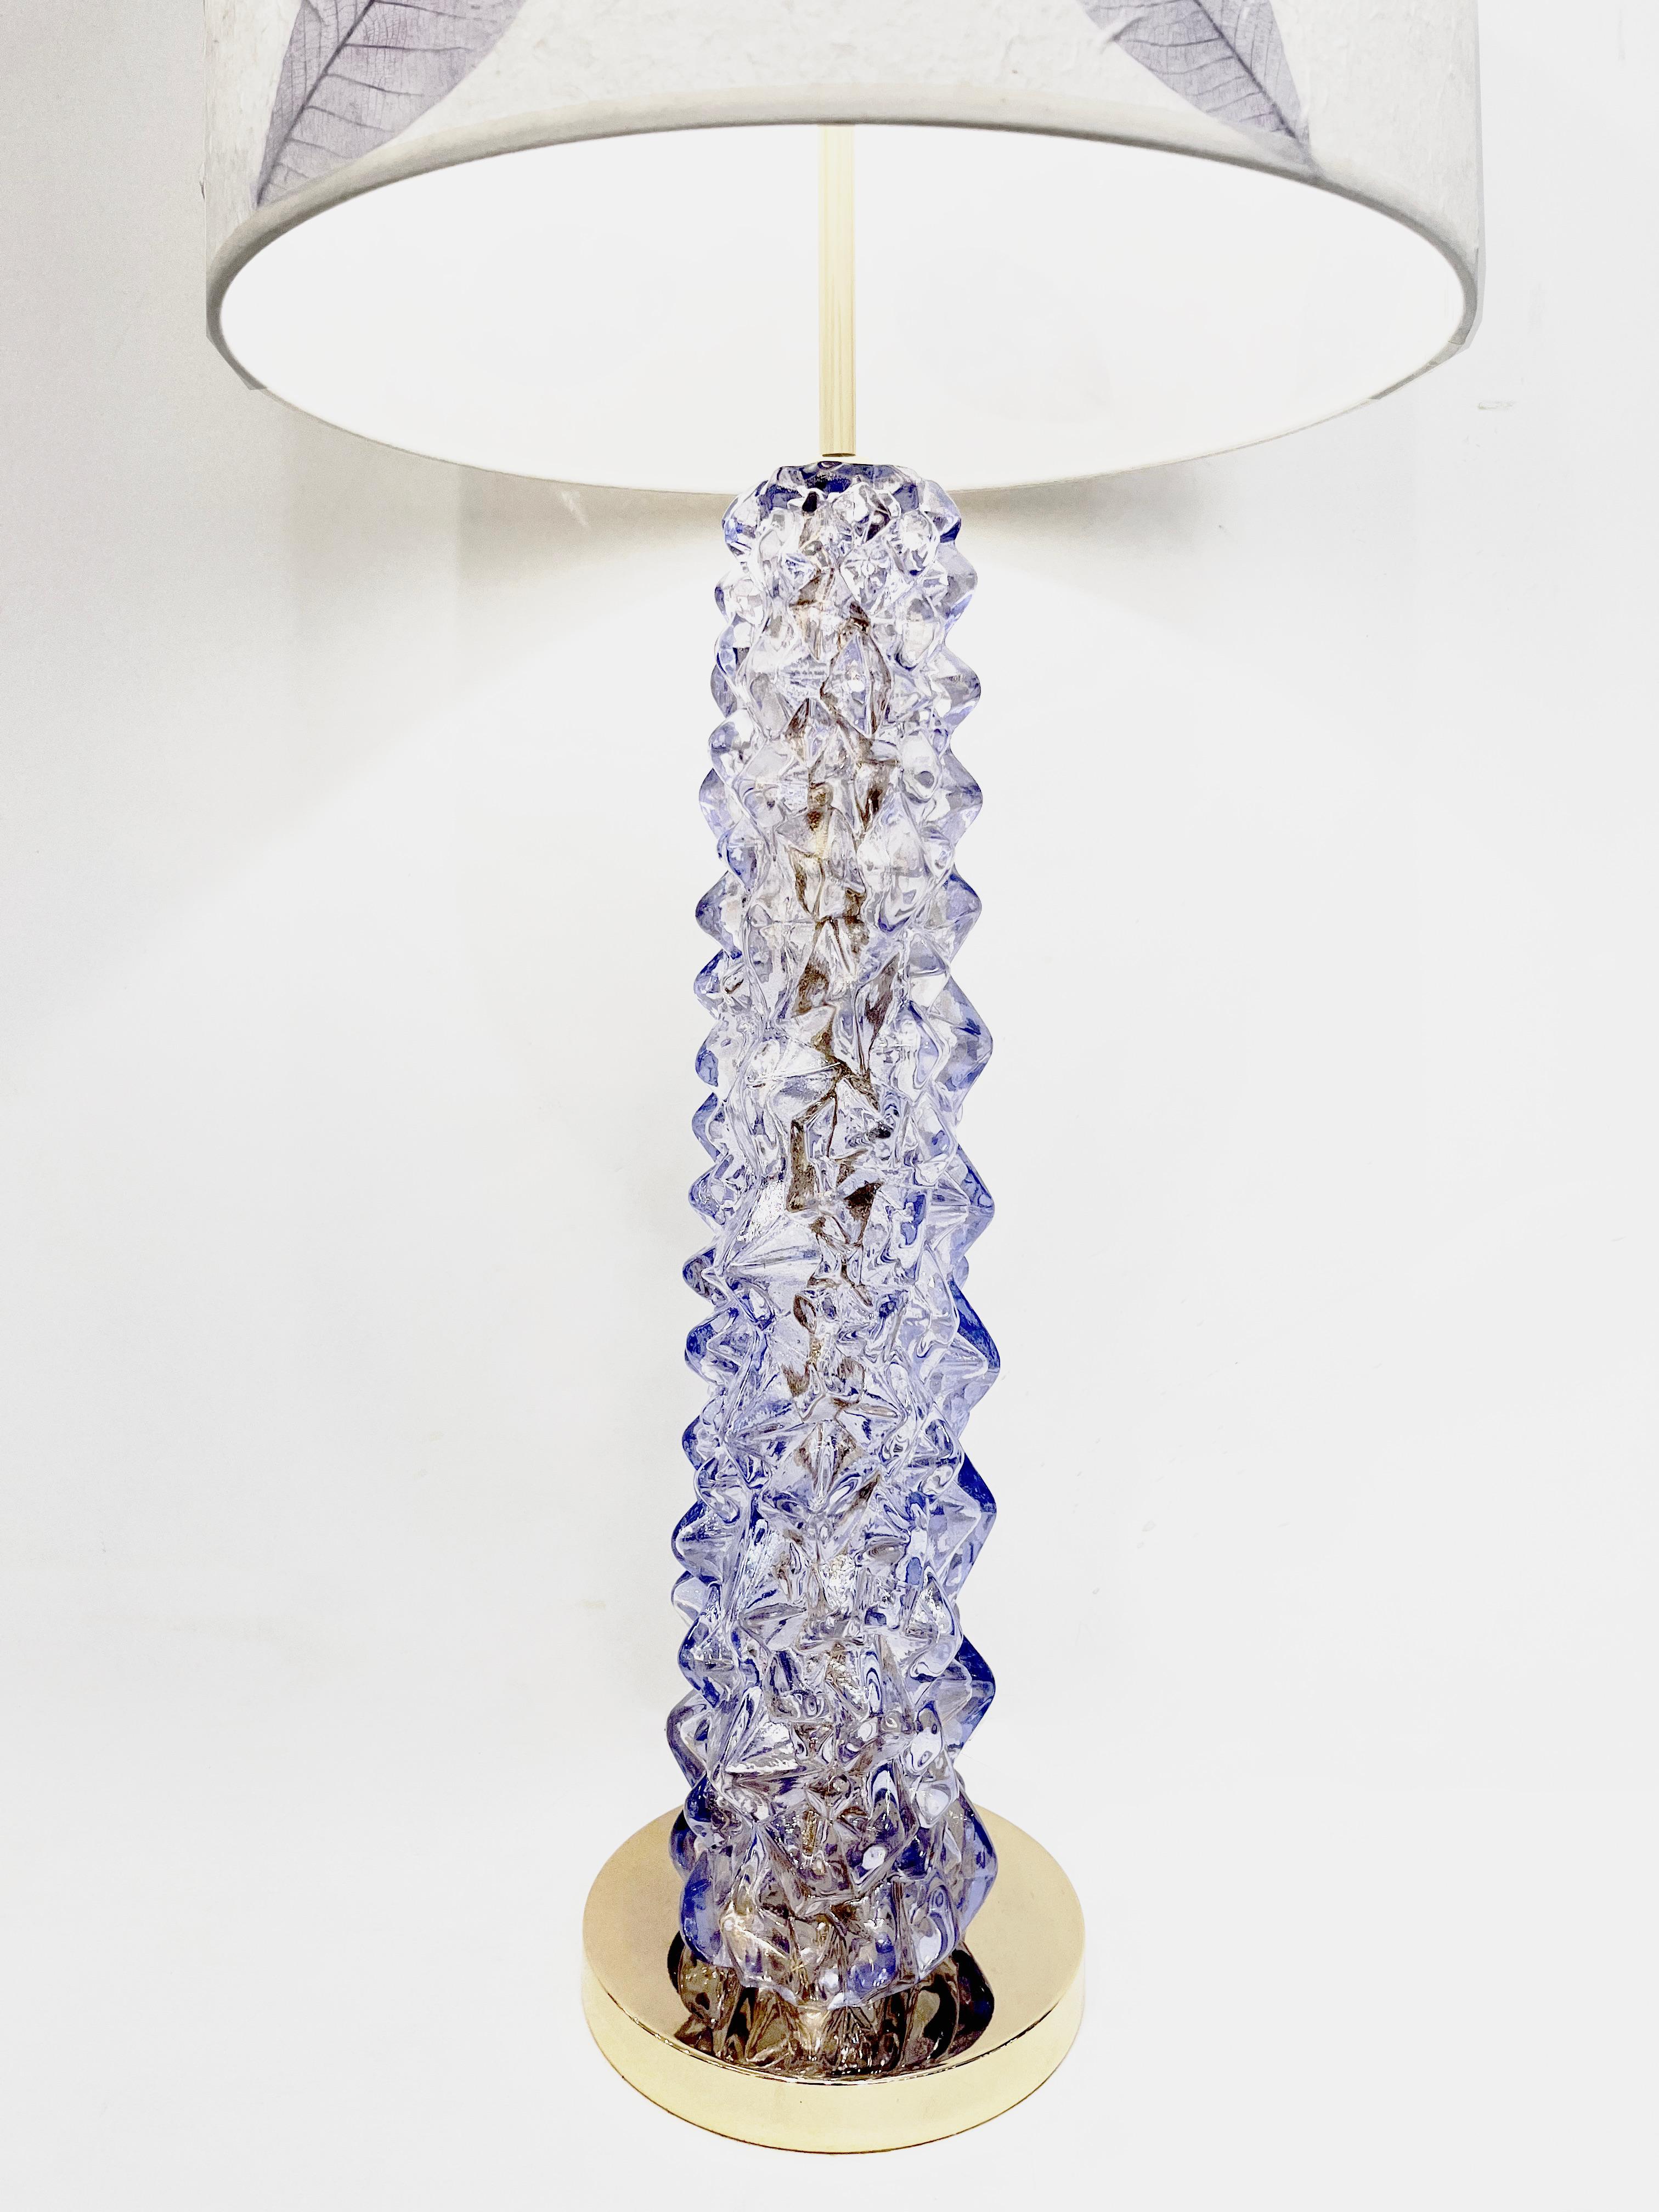 Modern Italian pair of tall lamps in Murano glass in a glowing lavender violet color, the central body worked with an irregular diamond-cut jewel-like texture that multiplies light reflections and play of color, raised on a polished brass round